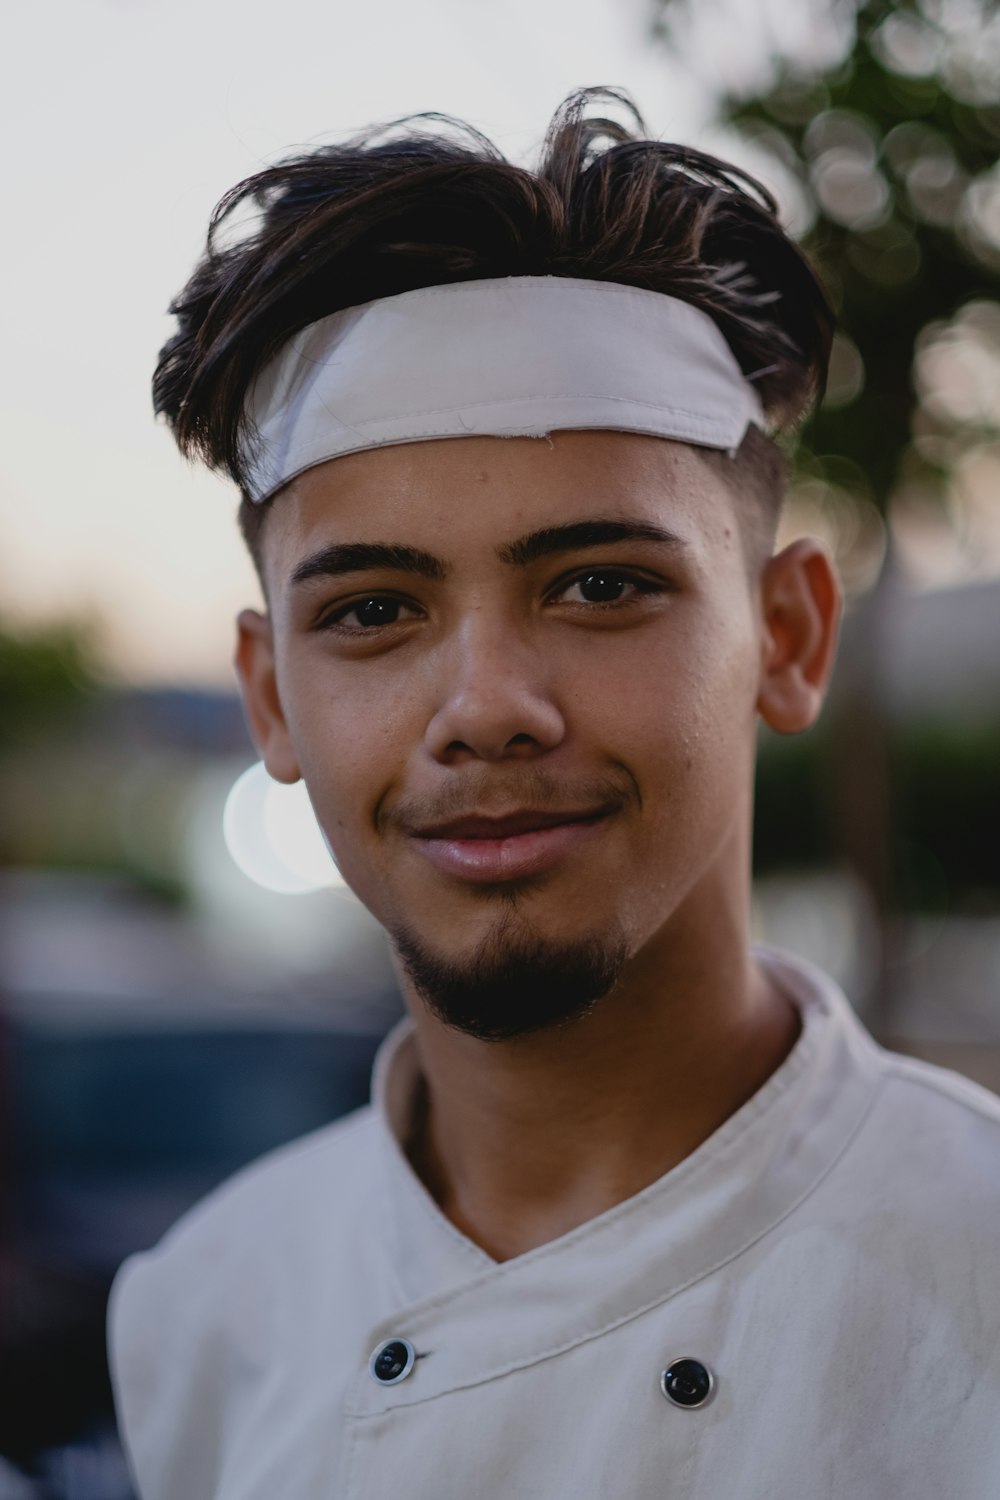 a man with a white headband and a white shirt